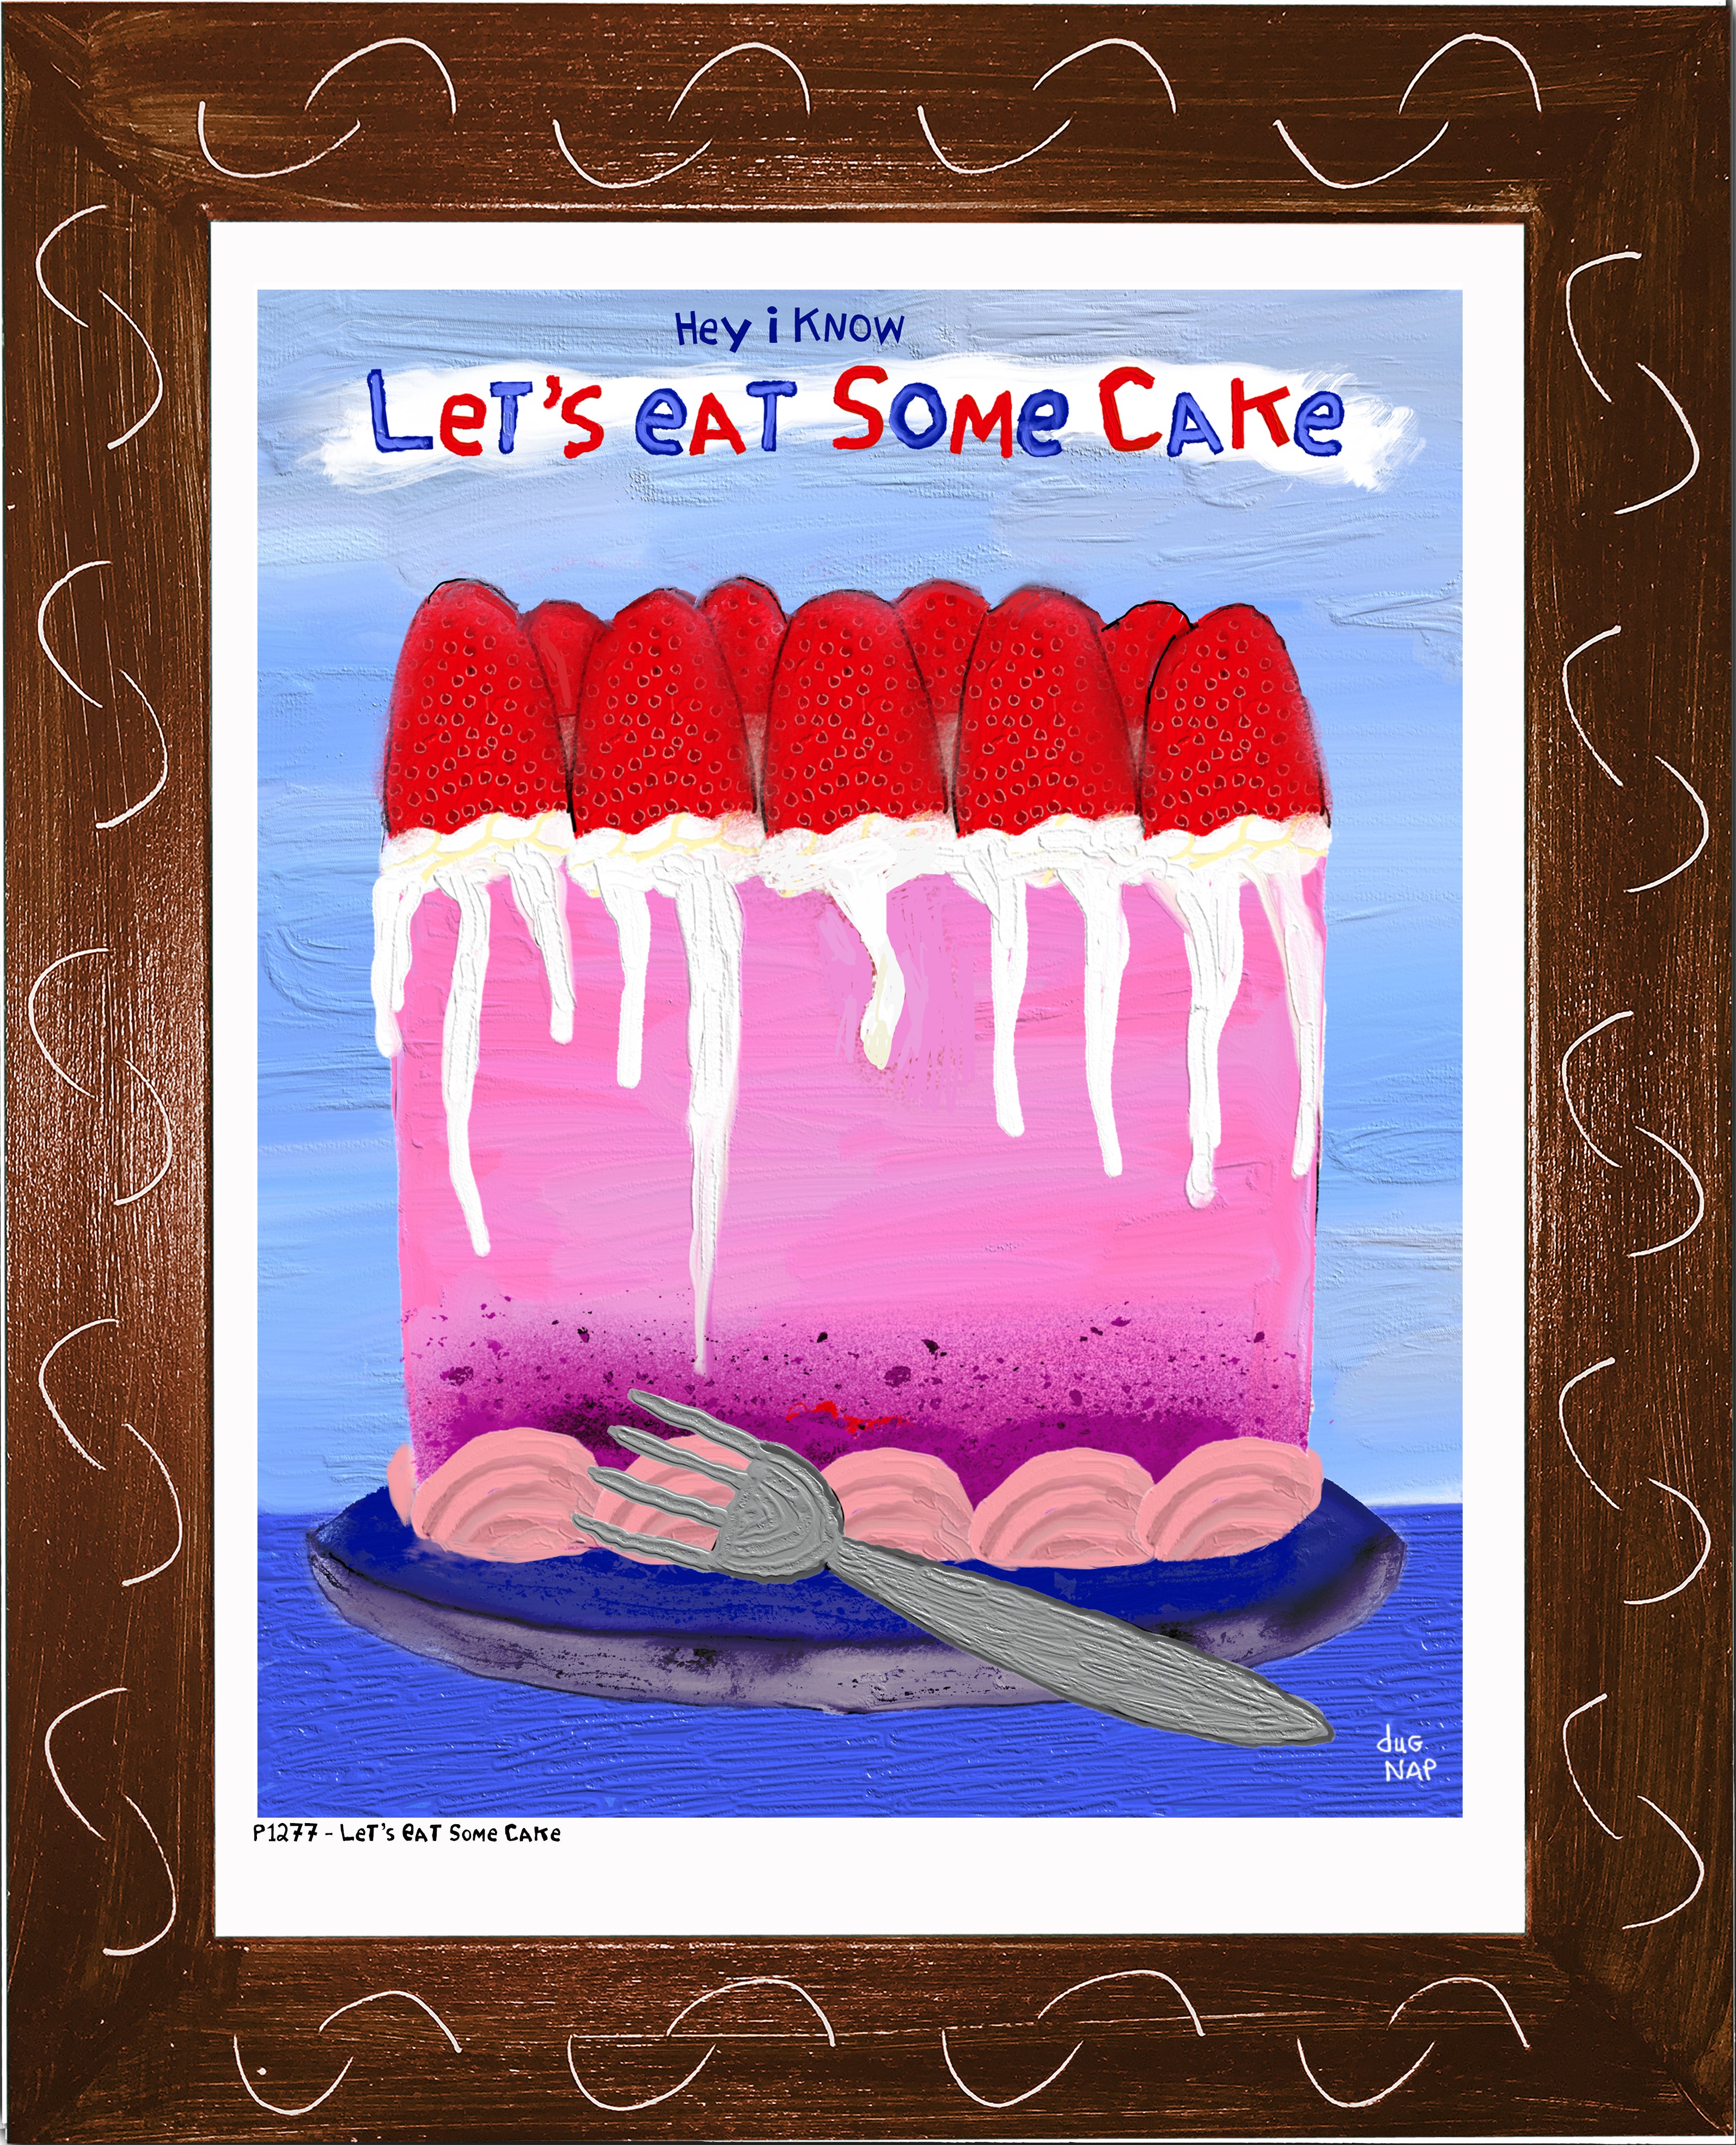 P1277 - Let's Eat Some Cake